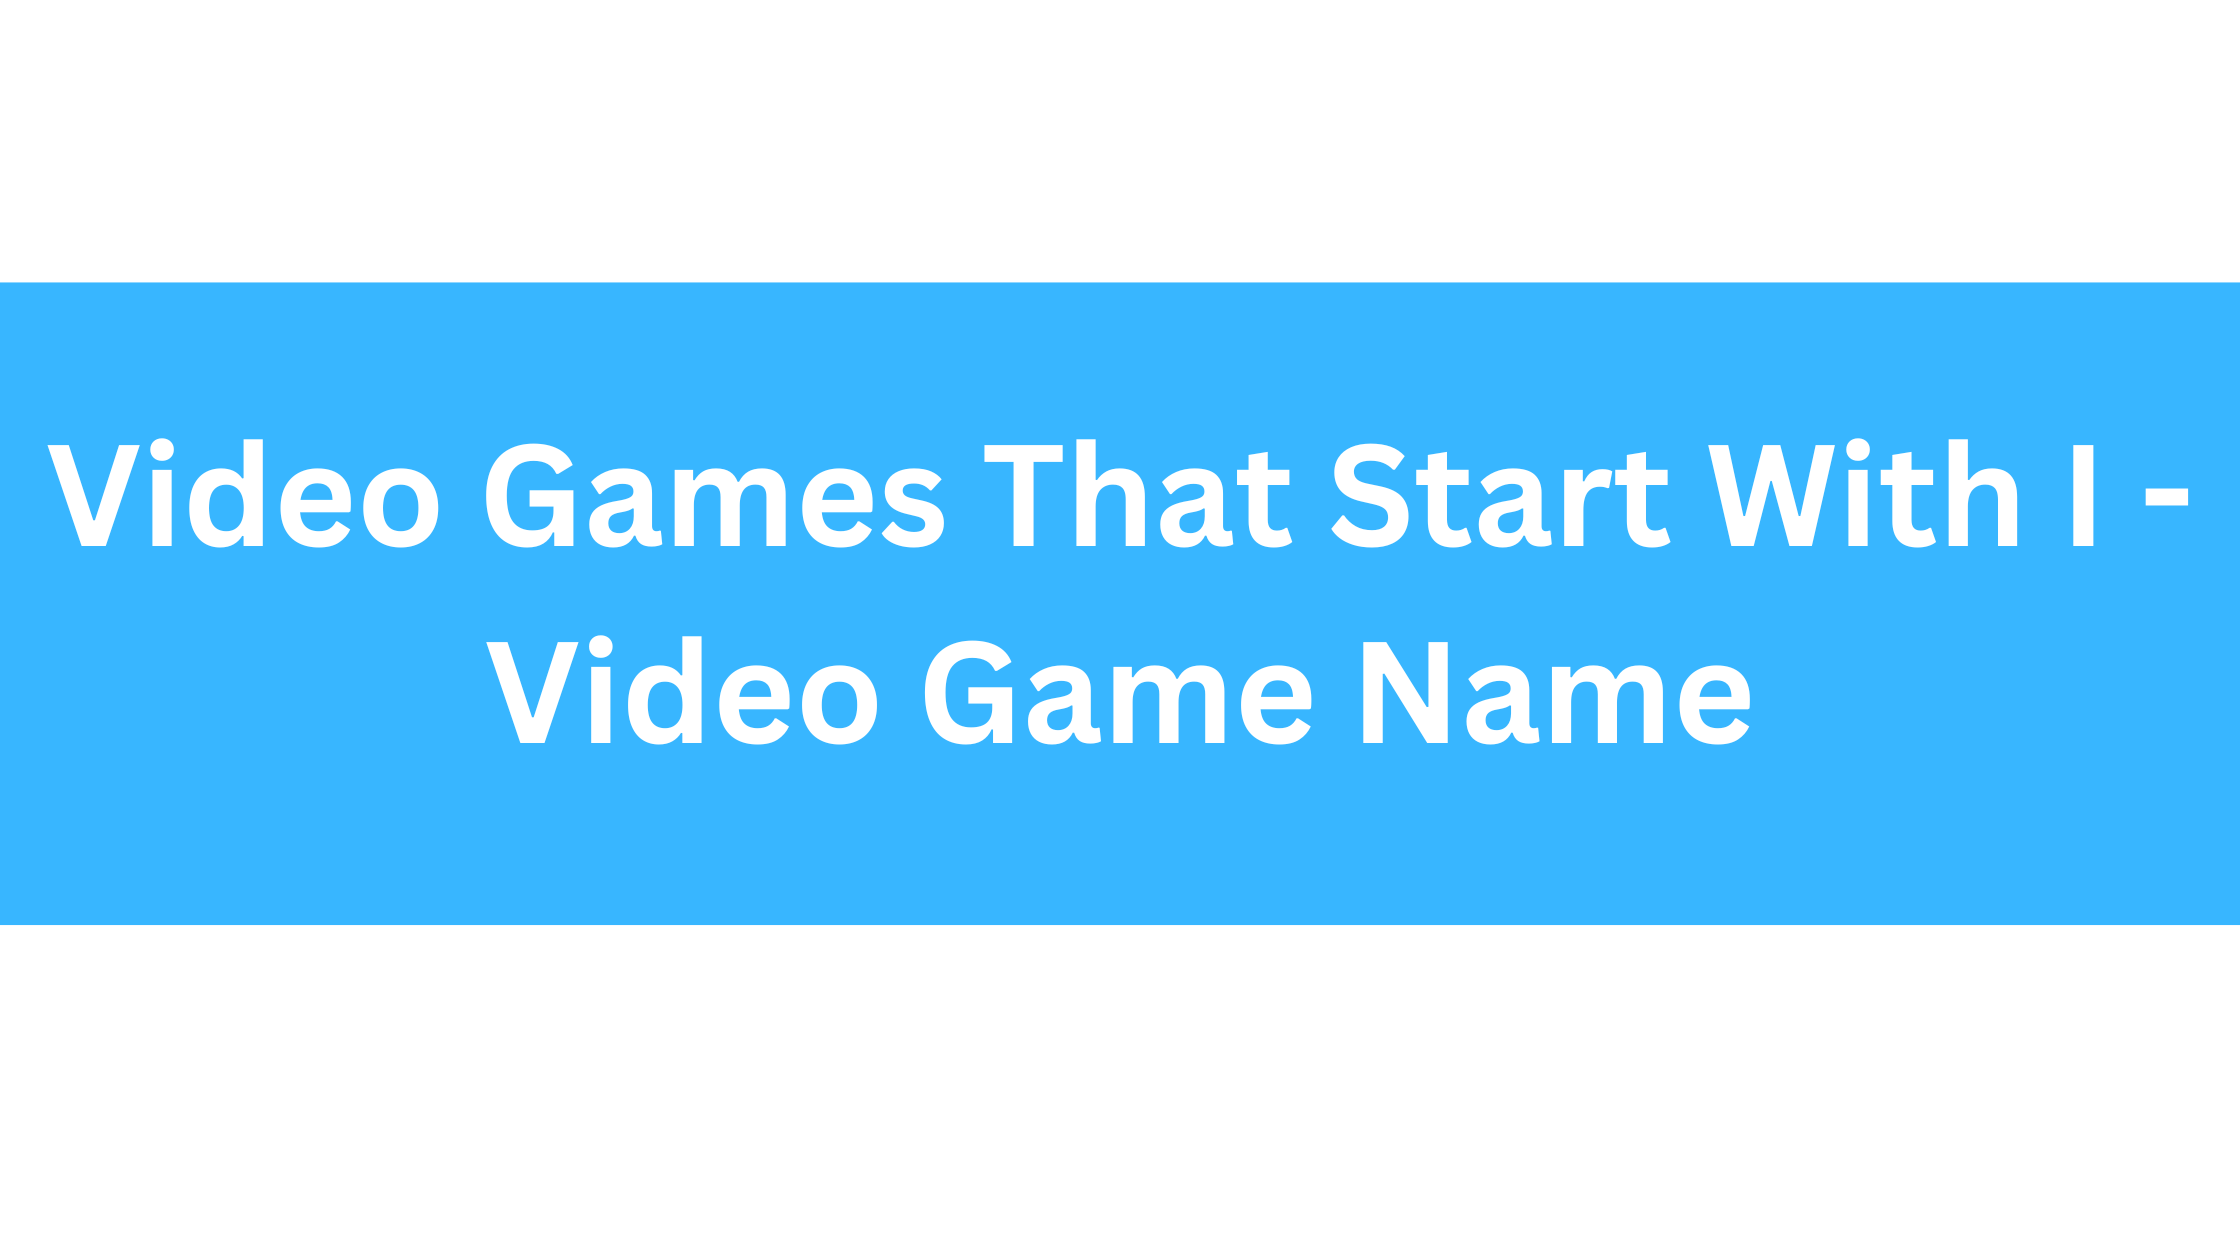 Video Games That Start With I